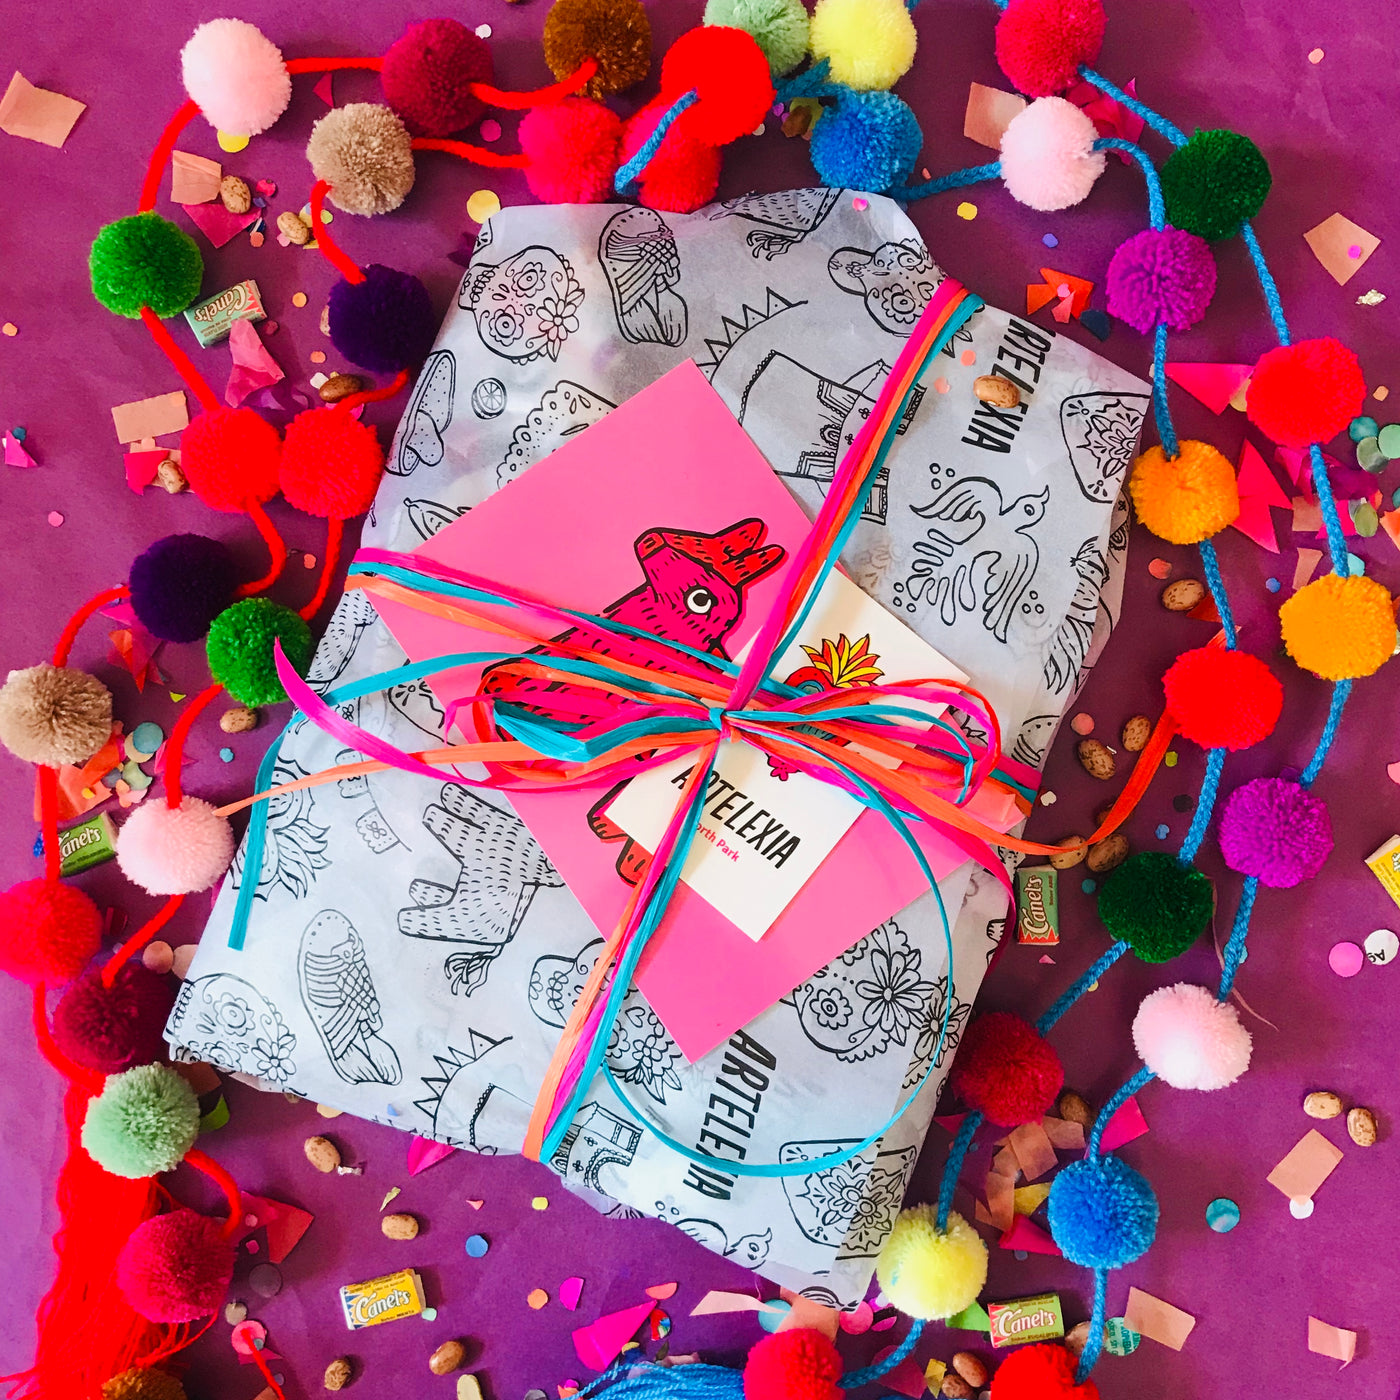 Top view of $75 goodie bag wrapped in Artelexia branded tissue paper and tied with colorful ribbon. Wrapped item includes postcard, business card, sticker, and confetti with beans and gum. Item pictured with colorful pom pom garland on top of pink tissue paper.